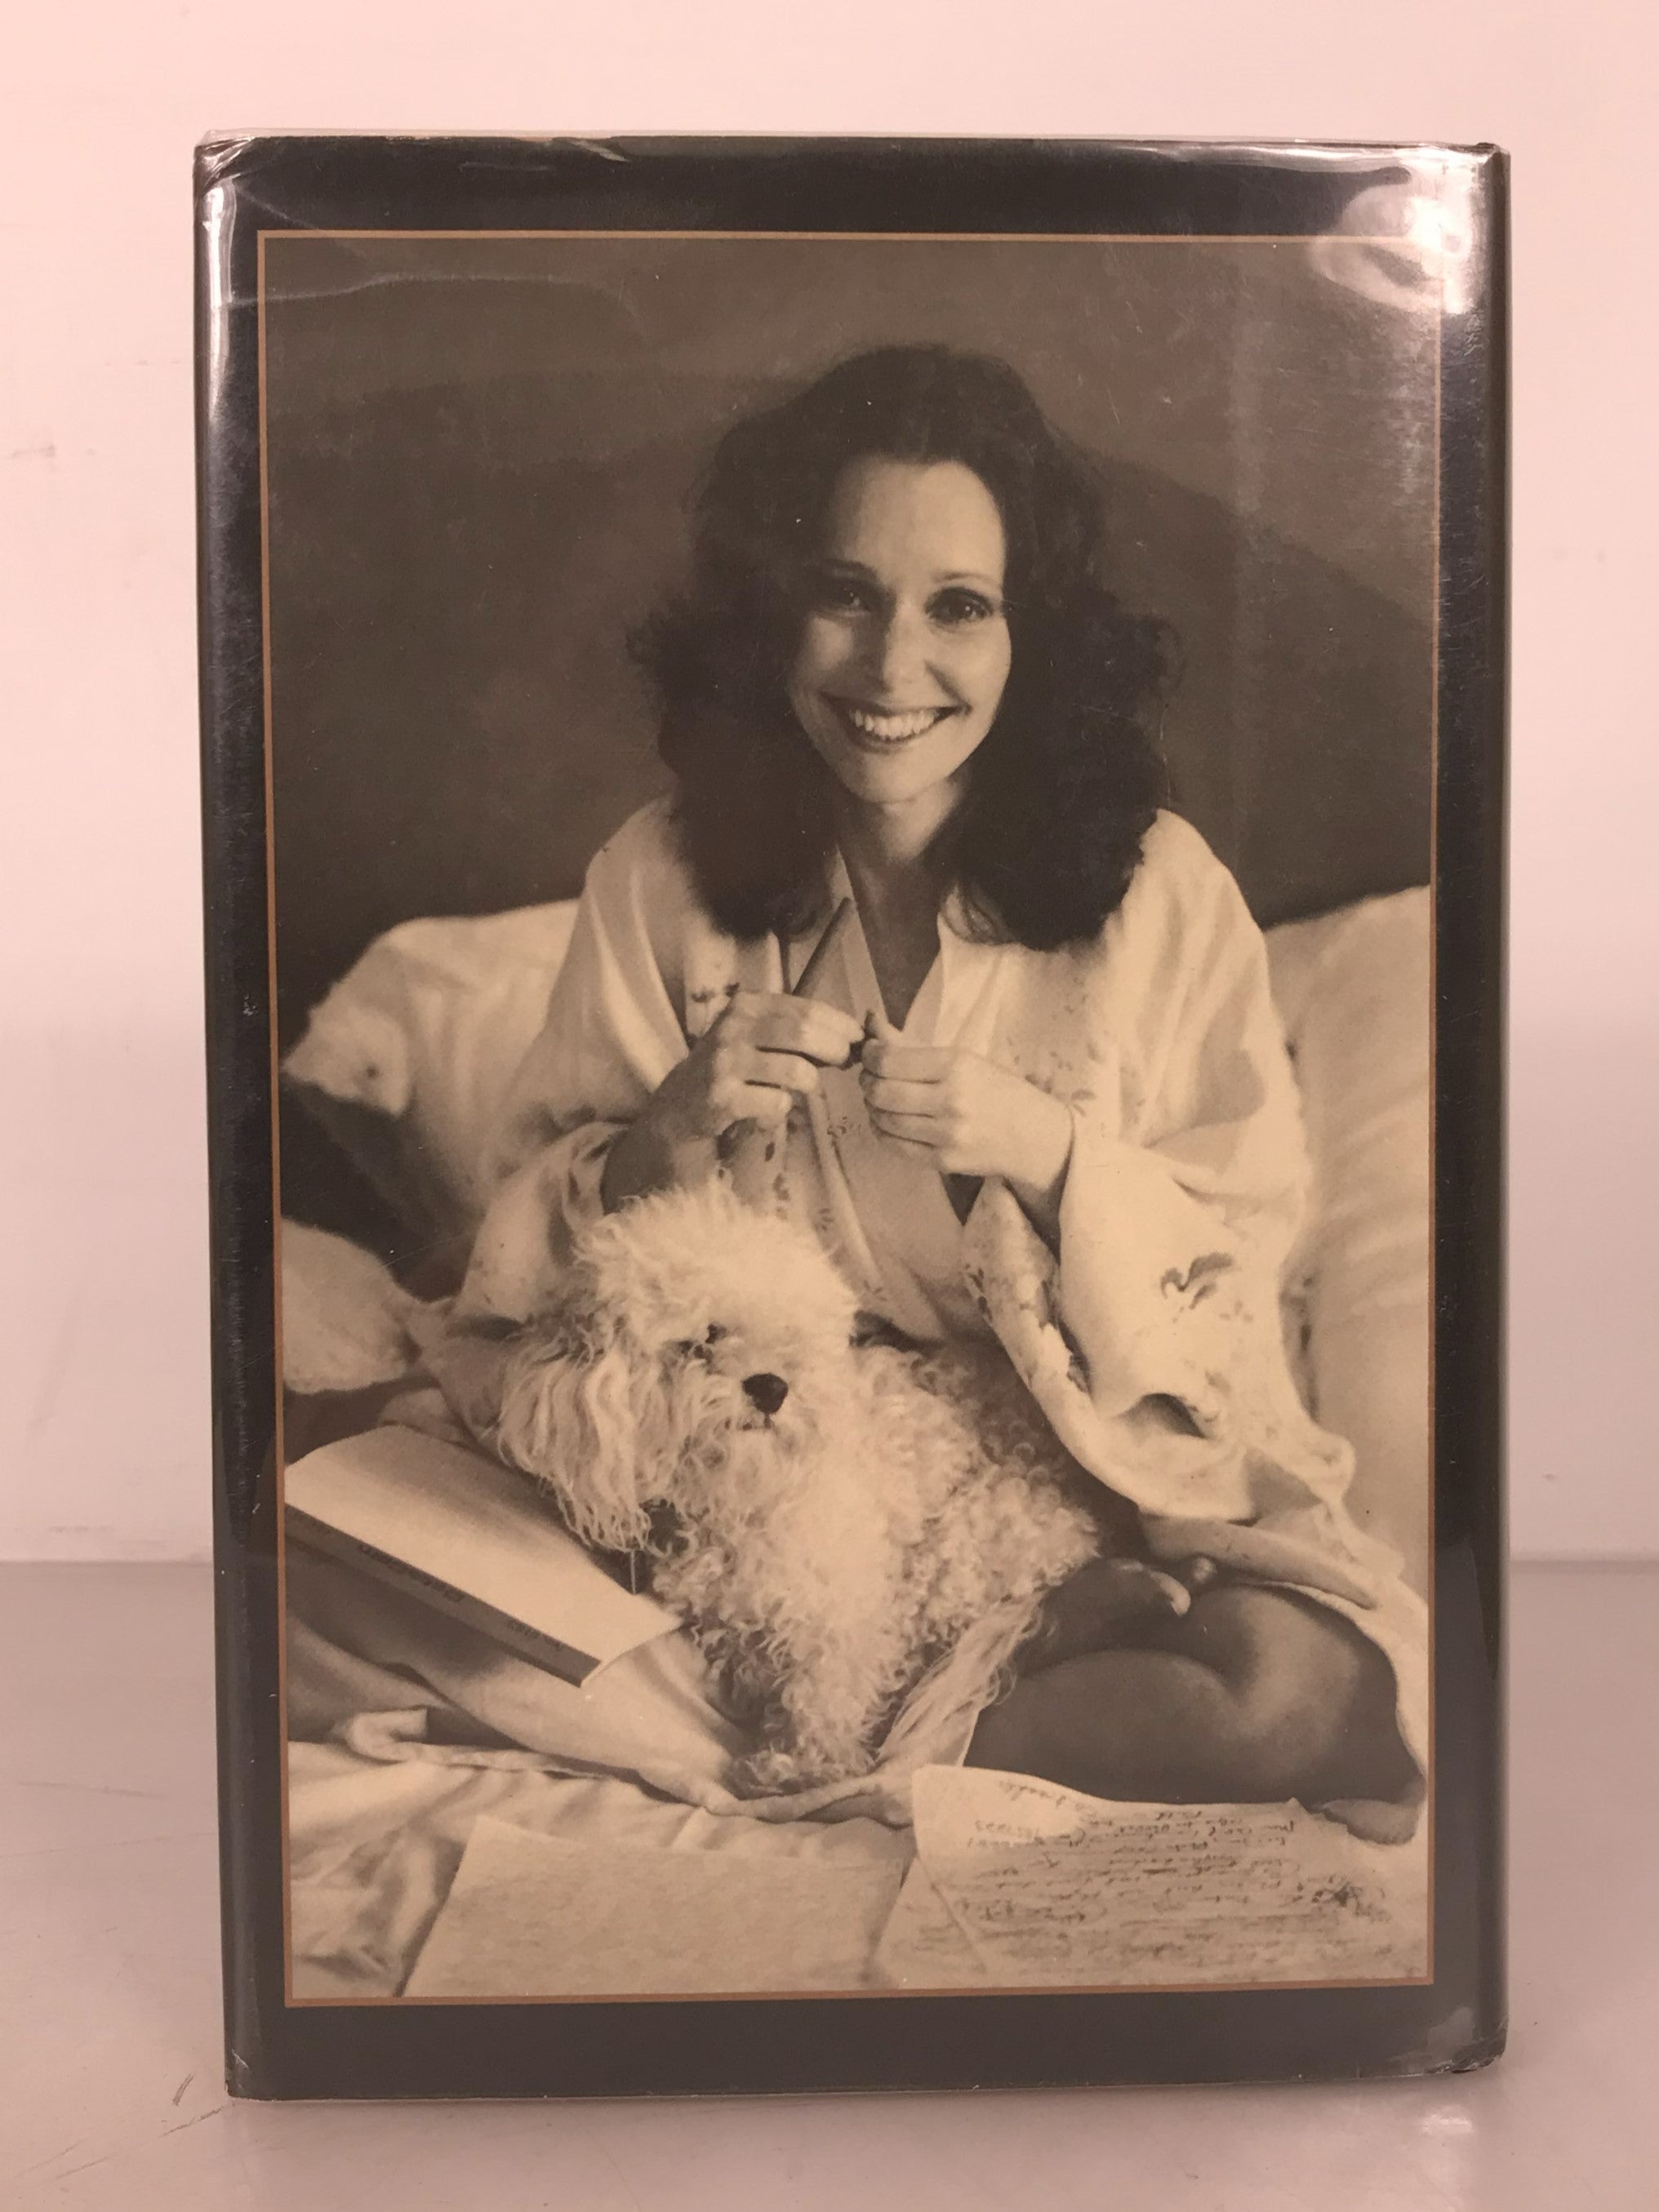 Bittersweet by Susan Strasberg Signed First Edition 1980 HC DJ